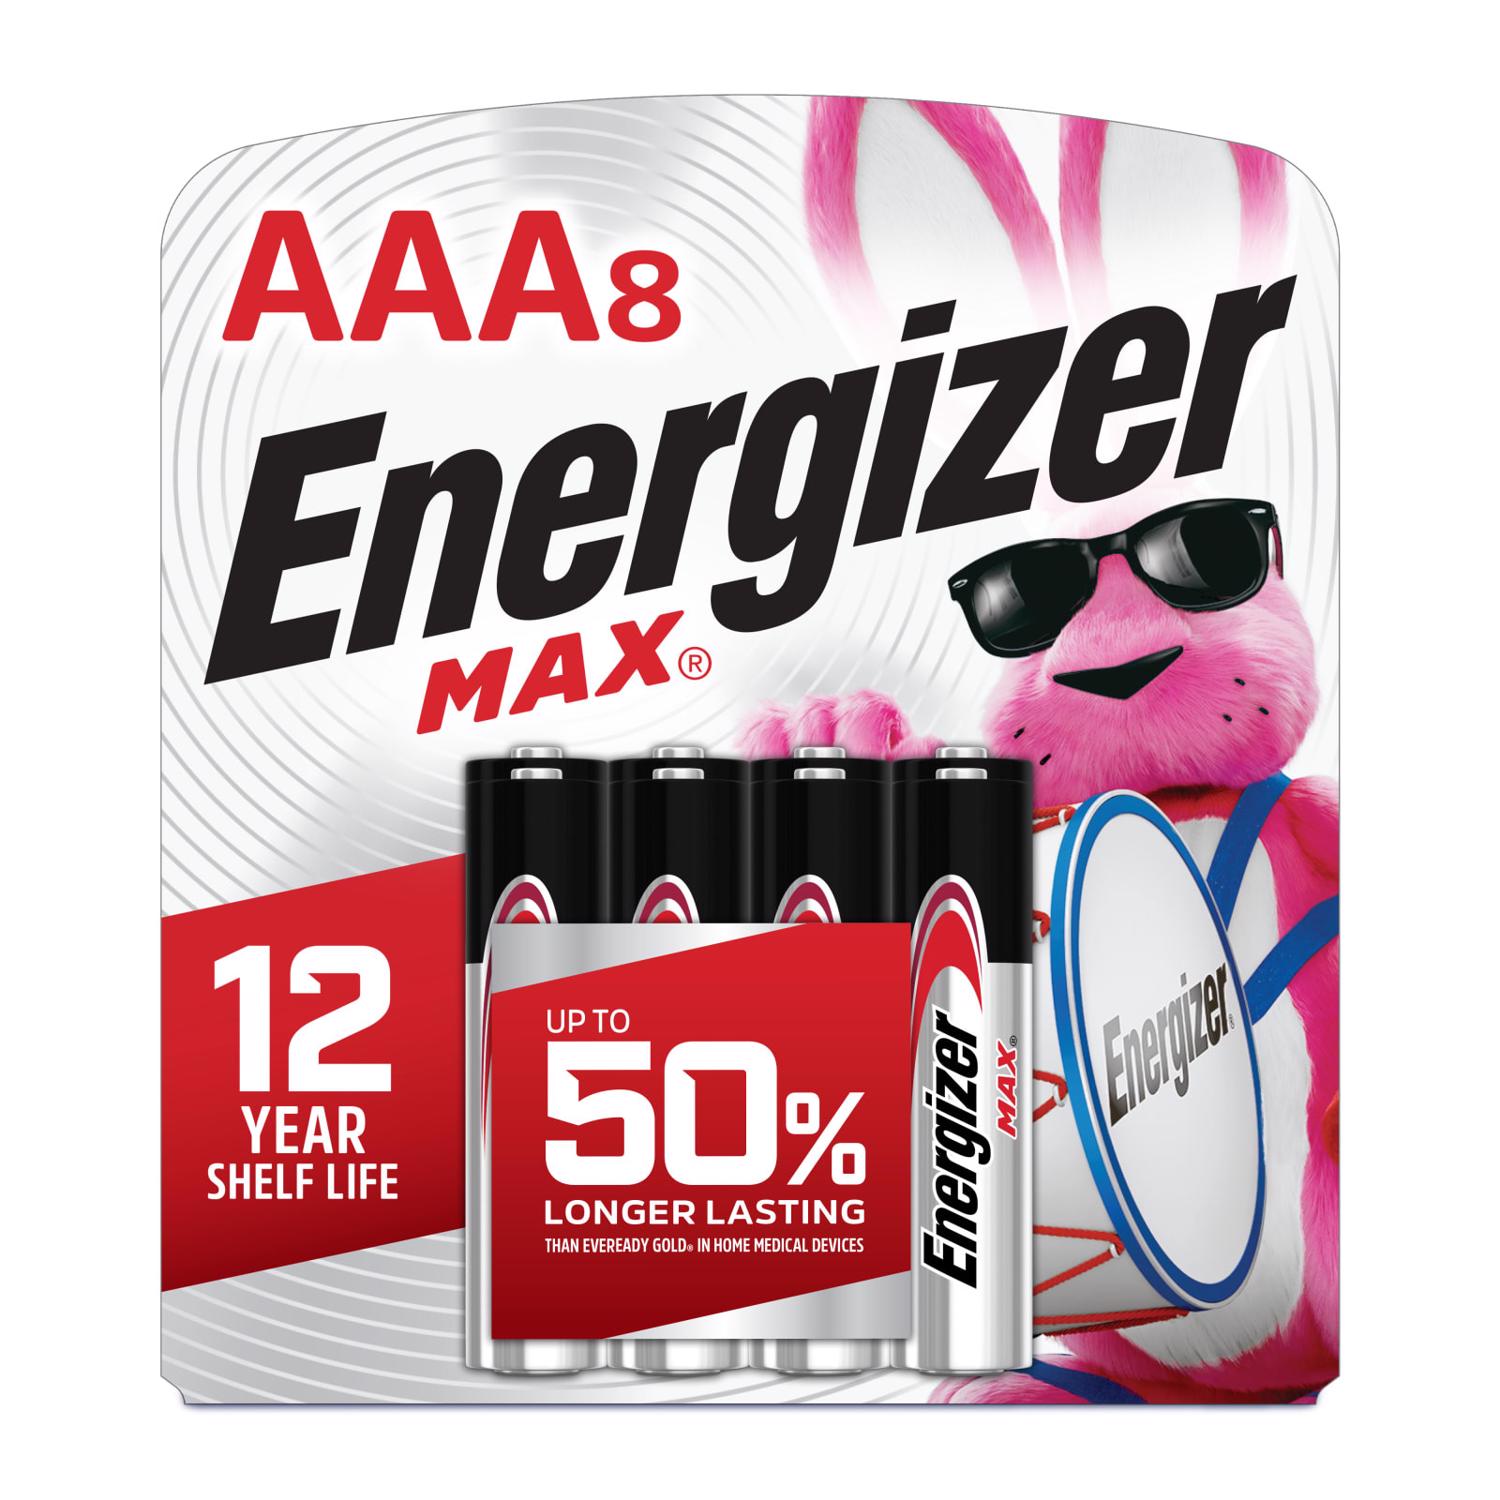 Photos - Household Switch Energizer Max Premium AAA Alkaline Batteries 8 pk Carded E92MP-8 